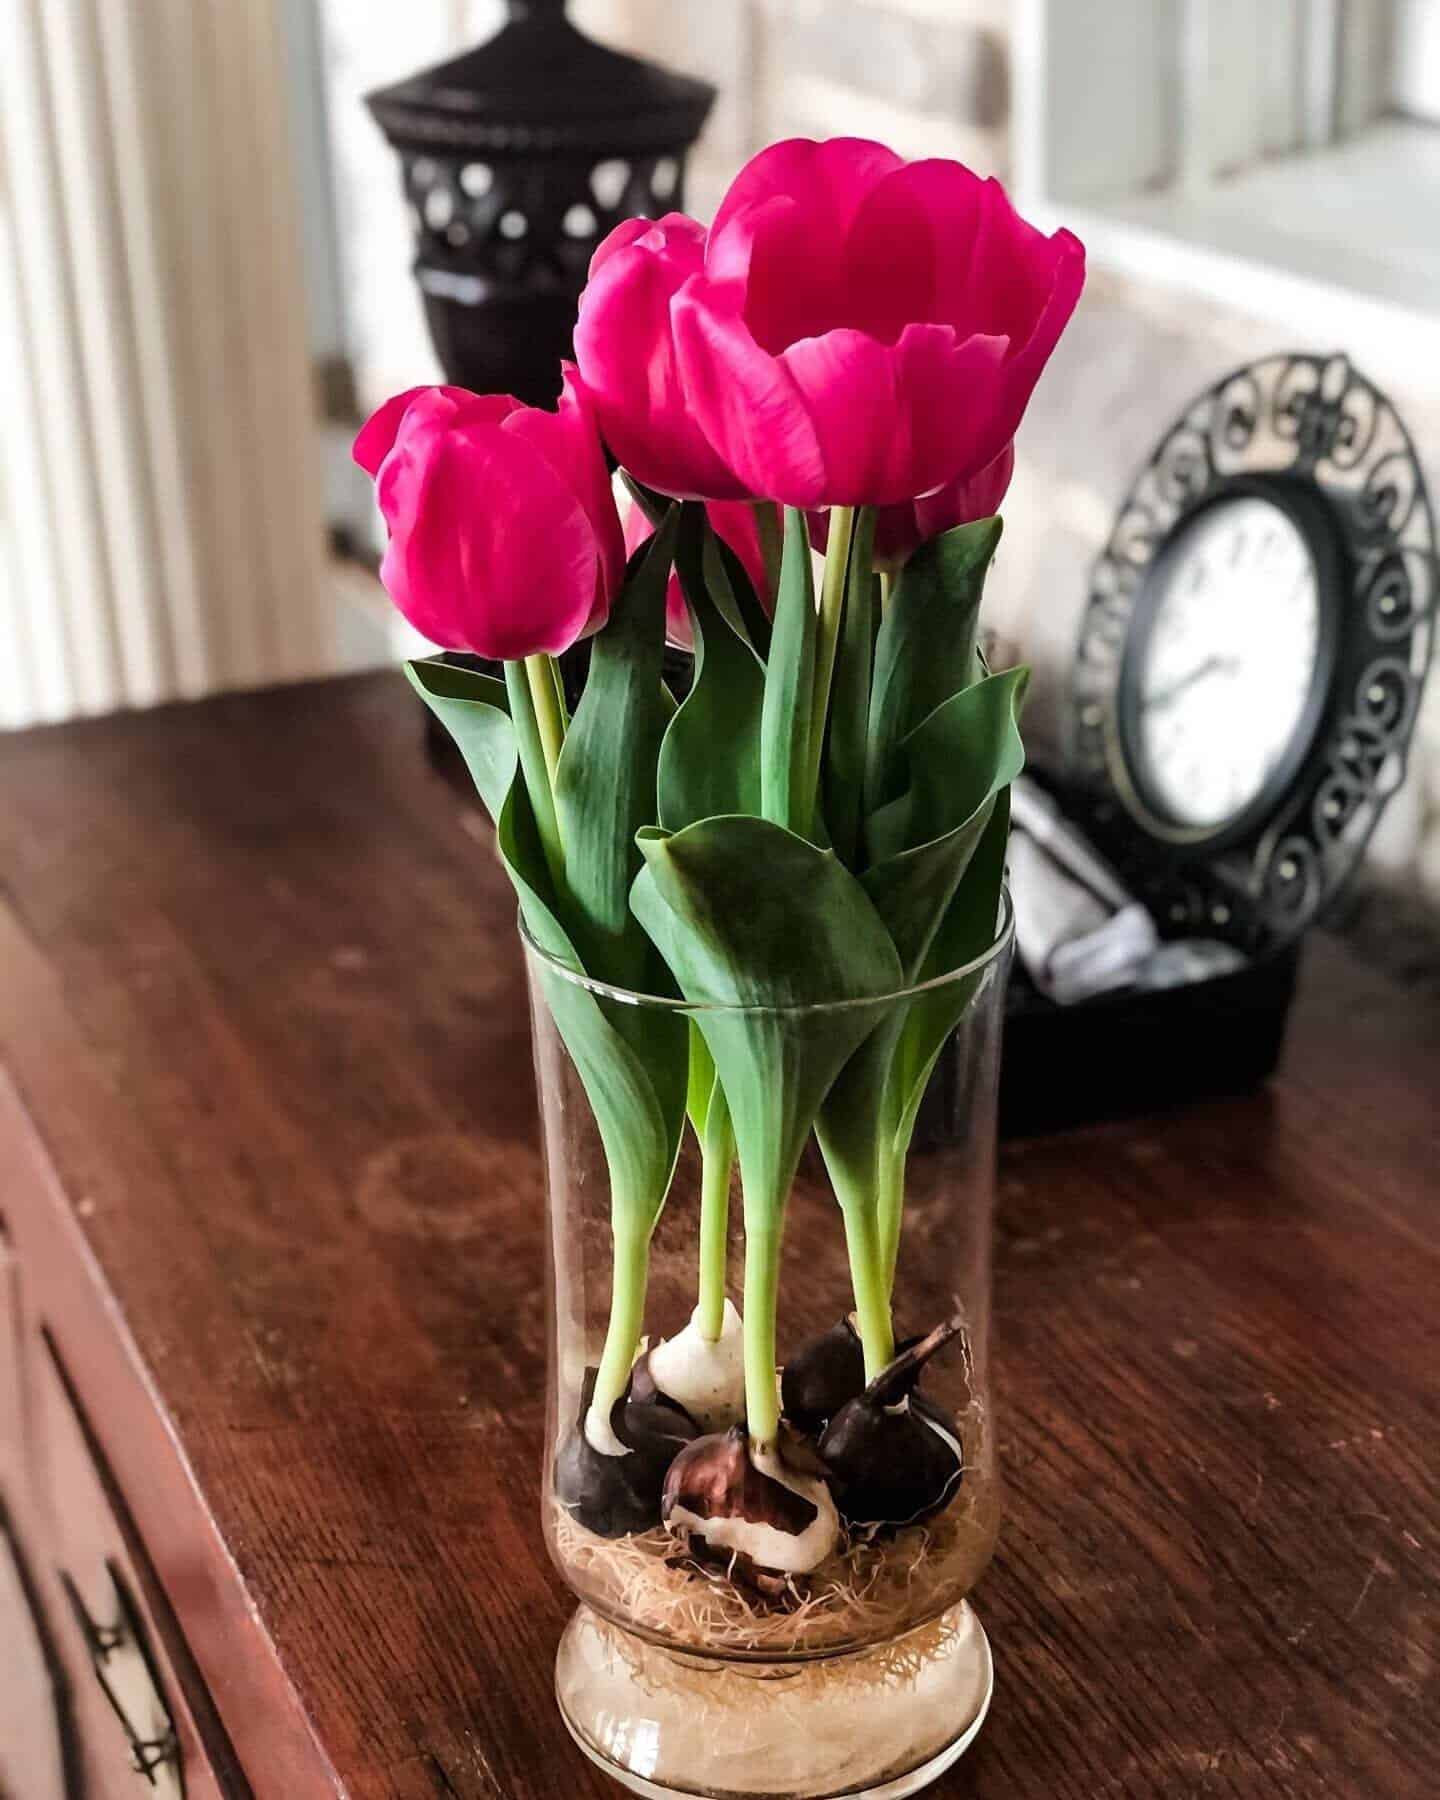 5 Steps To Grow Tulips In Water And Enjoy Their Bloom - 39